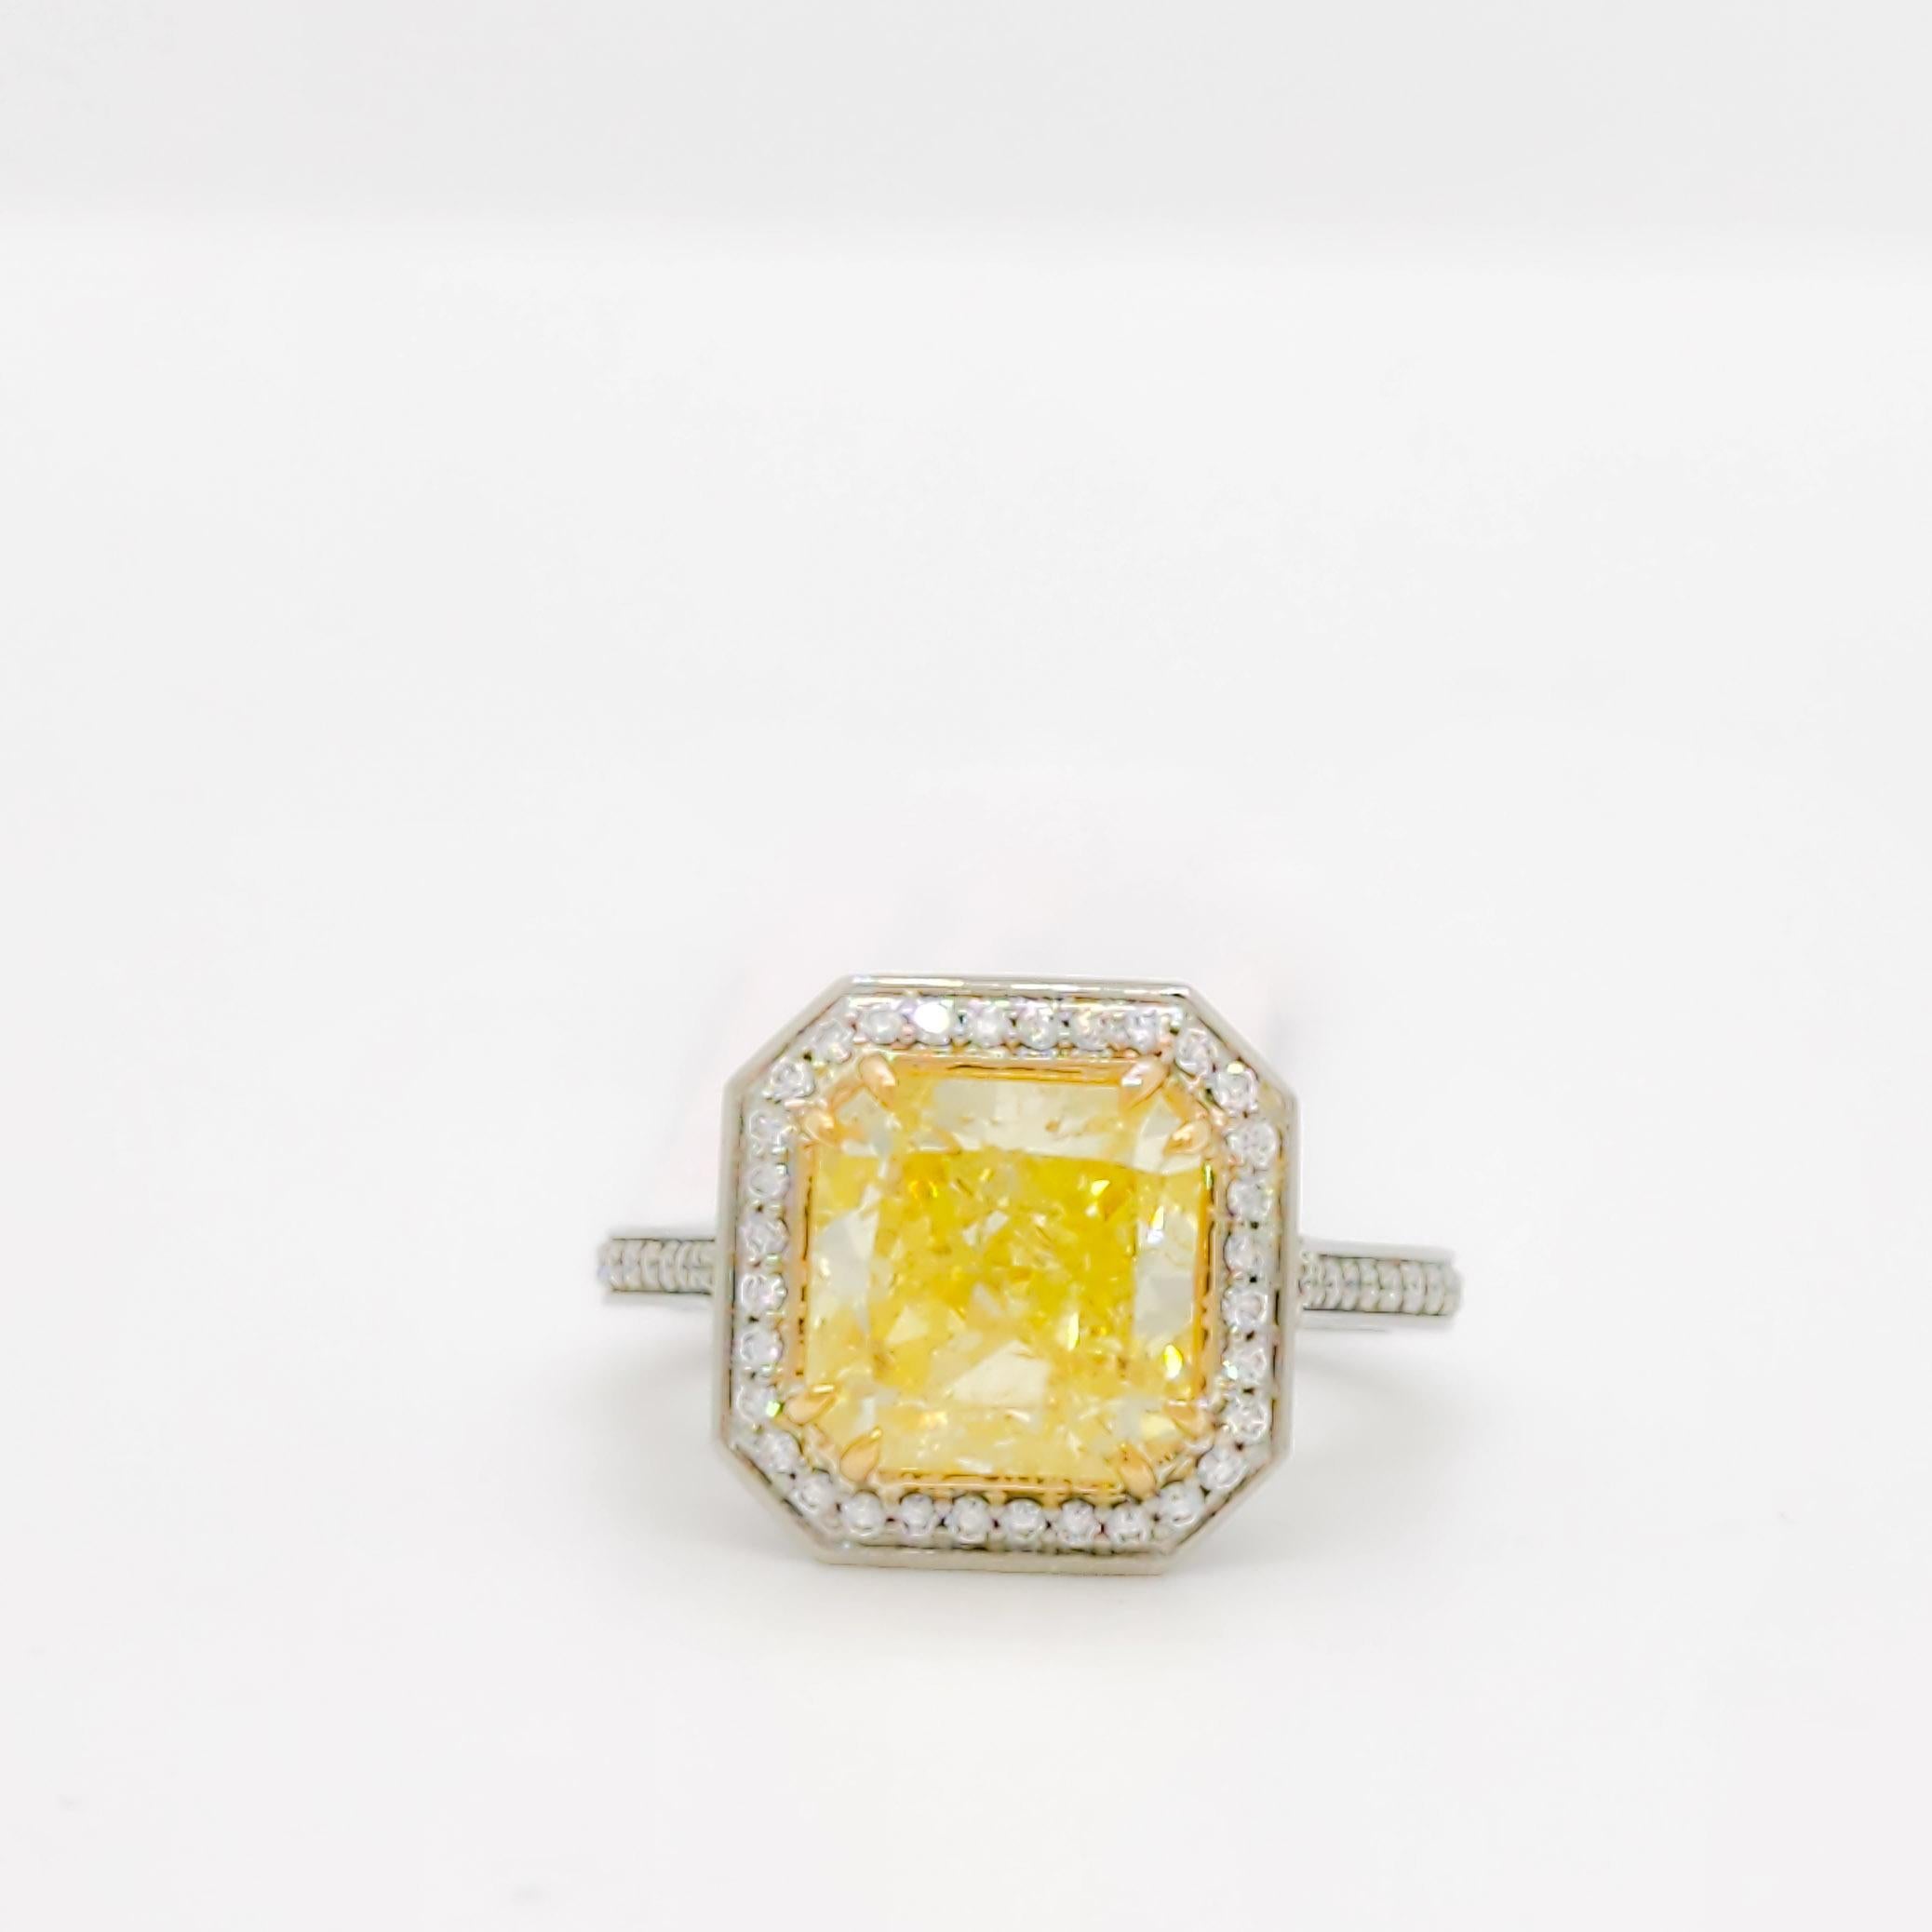 Radiant Cut GIA Fancy Yellow Radiant and White Diamond Ring in 18k For Sale